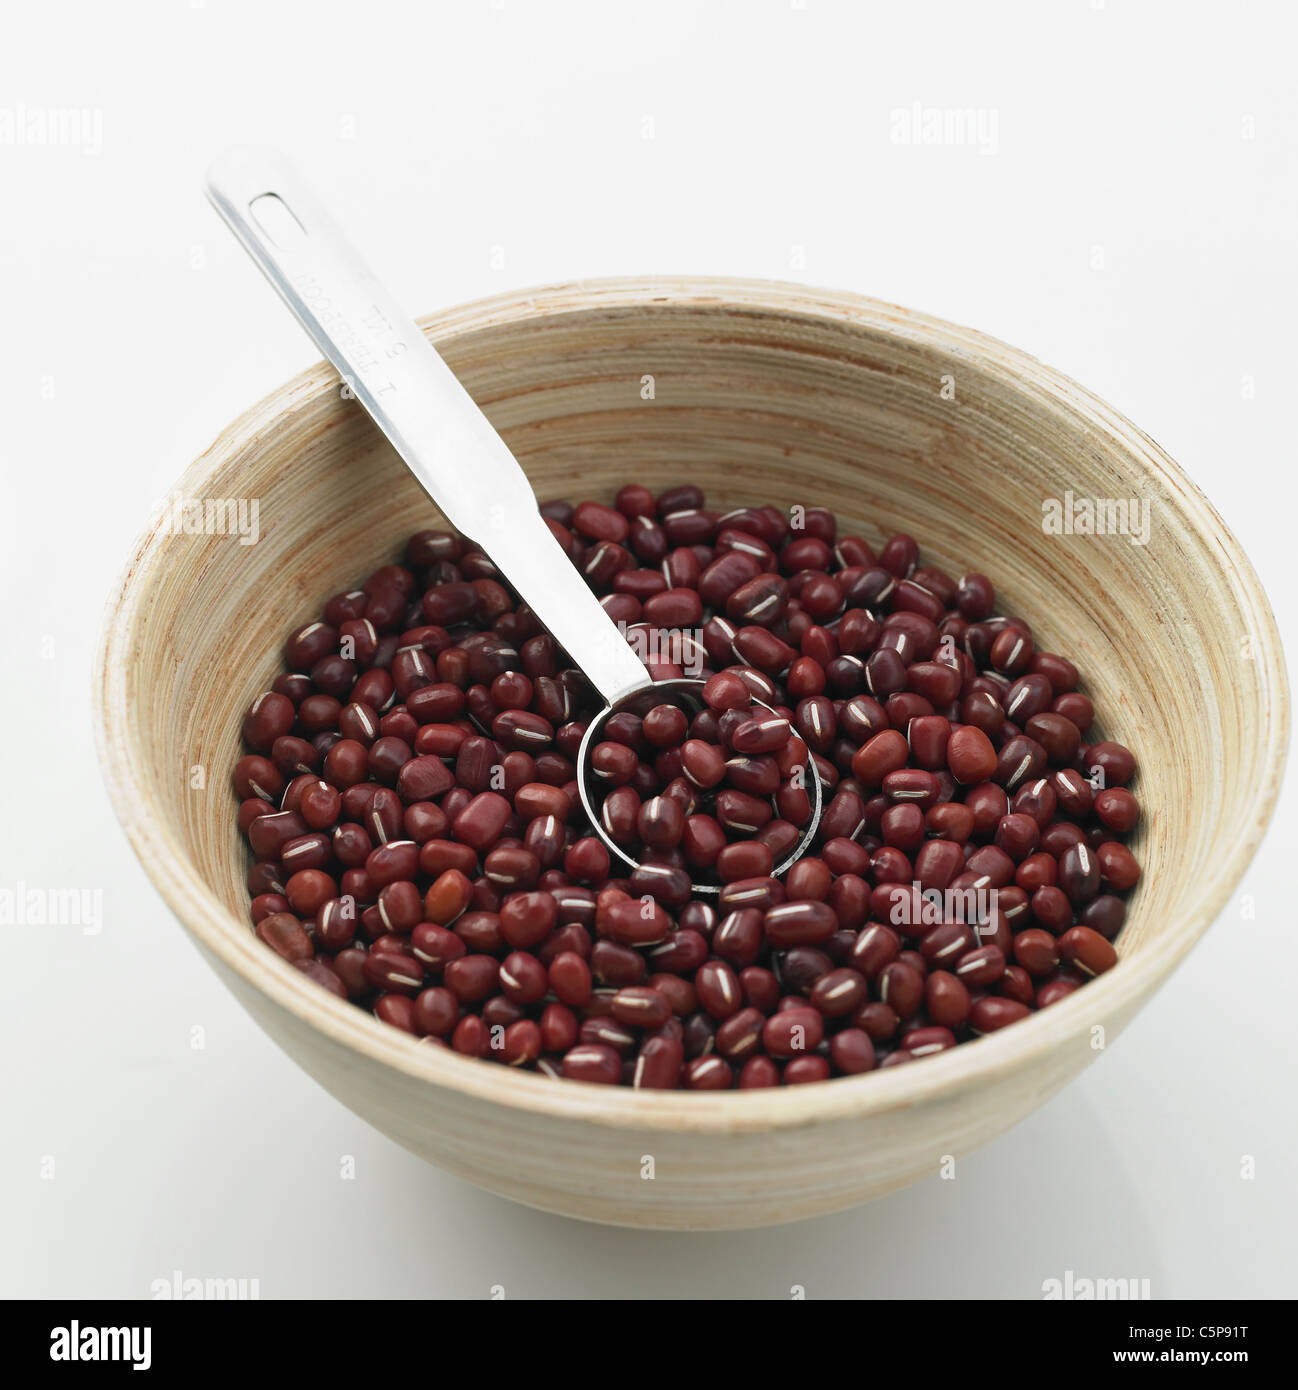 Beans in a bowl Stock Photo